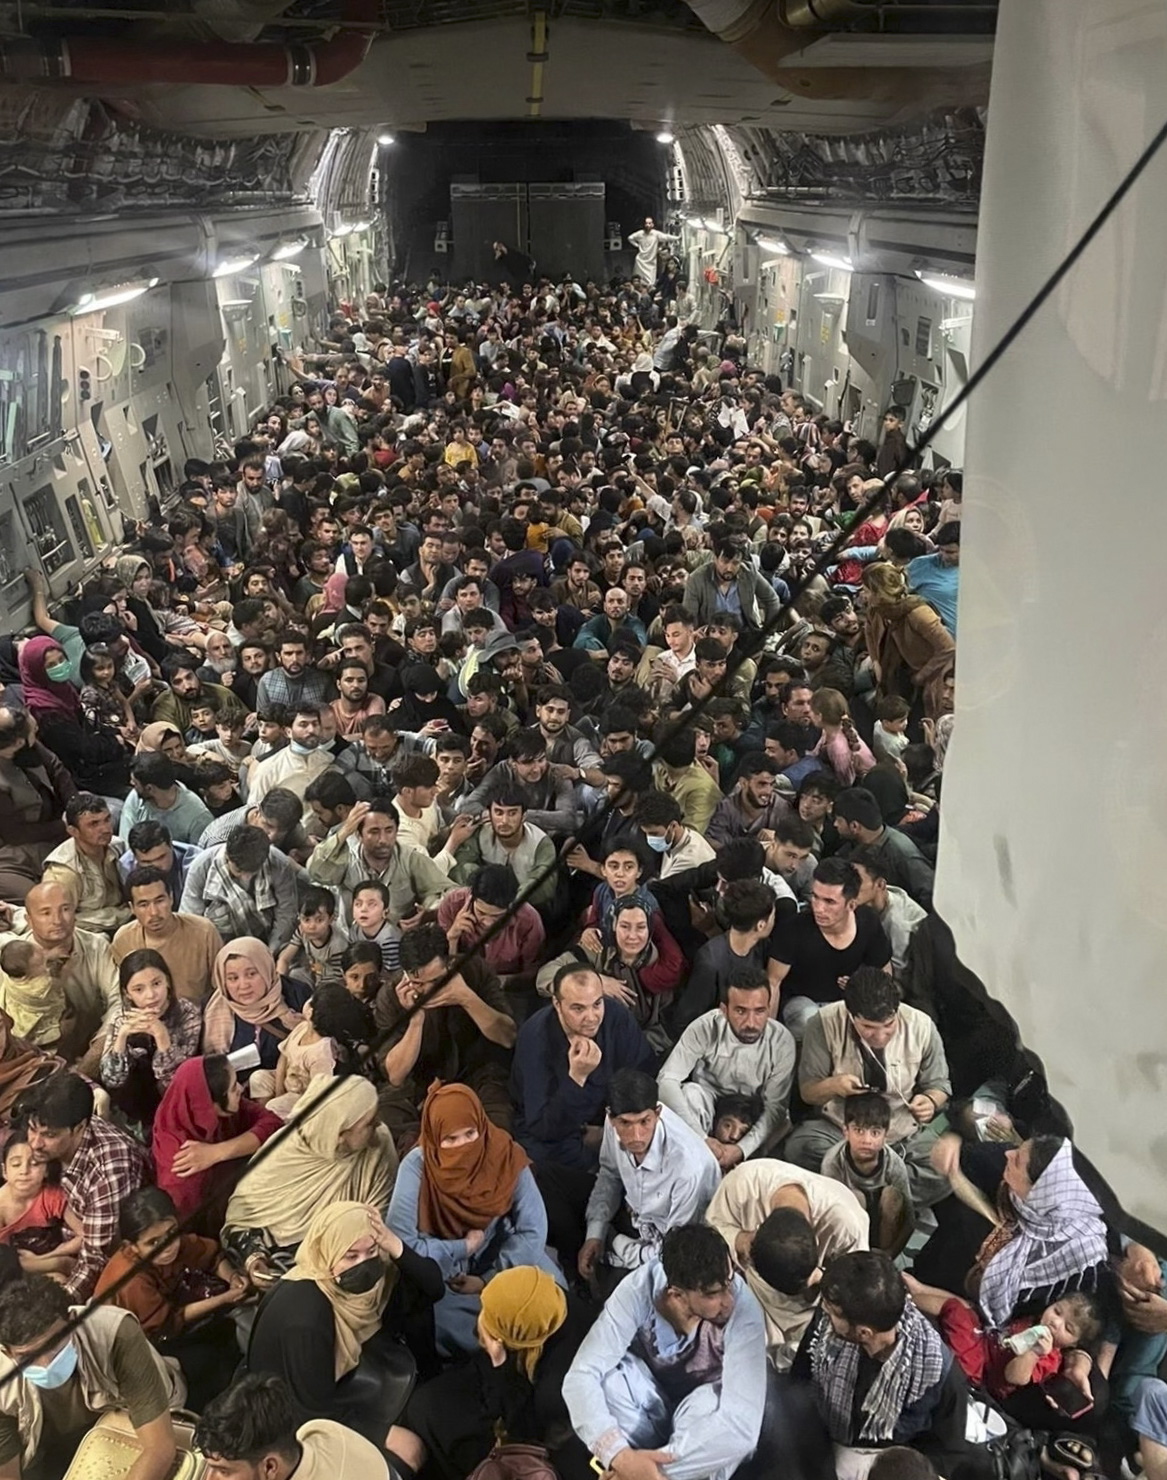 epa09417900 A picture made available on 17 August 2021 shows approximately 640 Afghan citizens being evacuated on an United States Air Force C-17 Globemaster III airplane from Hamid Karzai International Airport 15 August 2021 in Kabul, Afghanistan. The United States military has been working to evacuate US citizens and some Afghan citizens after the Taliban took over Afghanistan as the US pulled out of the country.  EPA/AIR MOBILITY COMMAND PUBLIC AFFAIRS HANDOUT  HANDOUT EDITORIAL USE ONLY/NO SALES